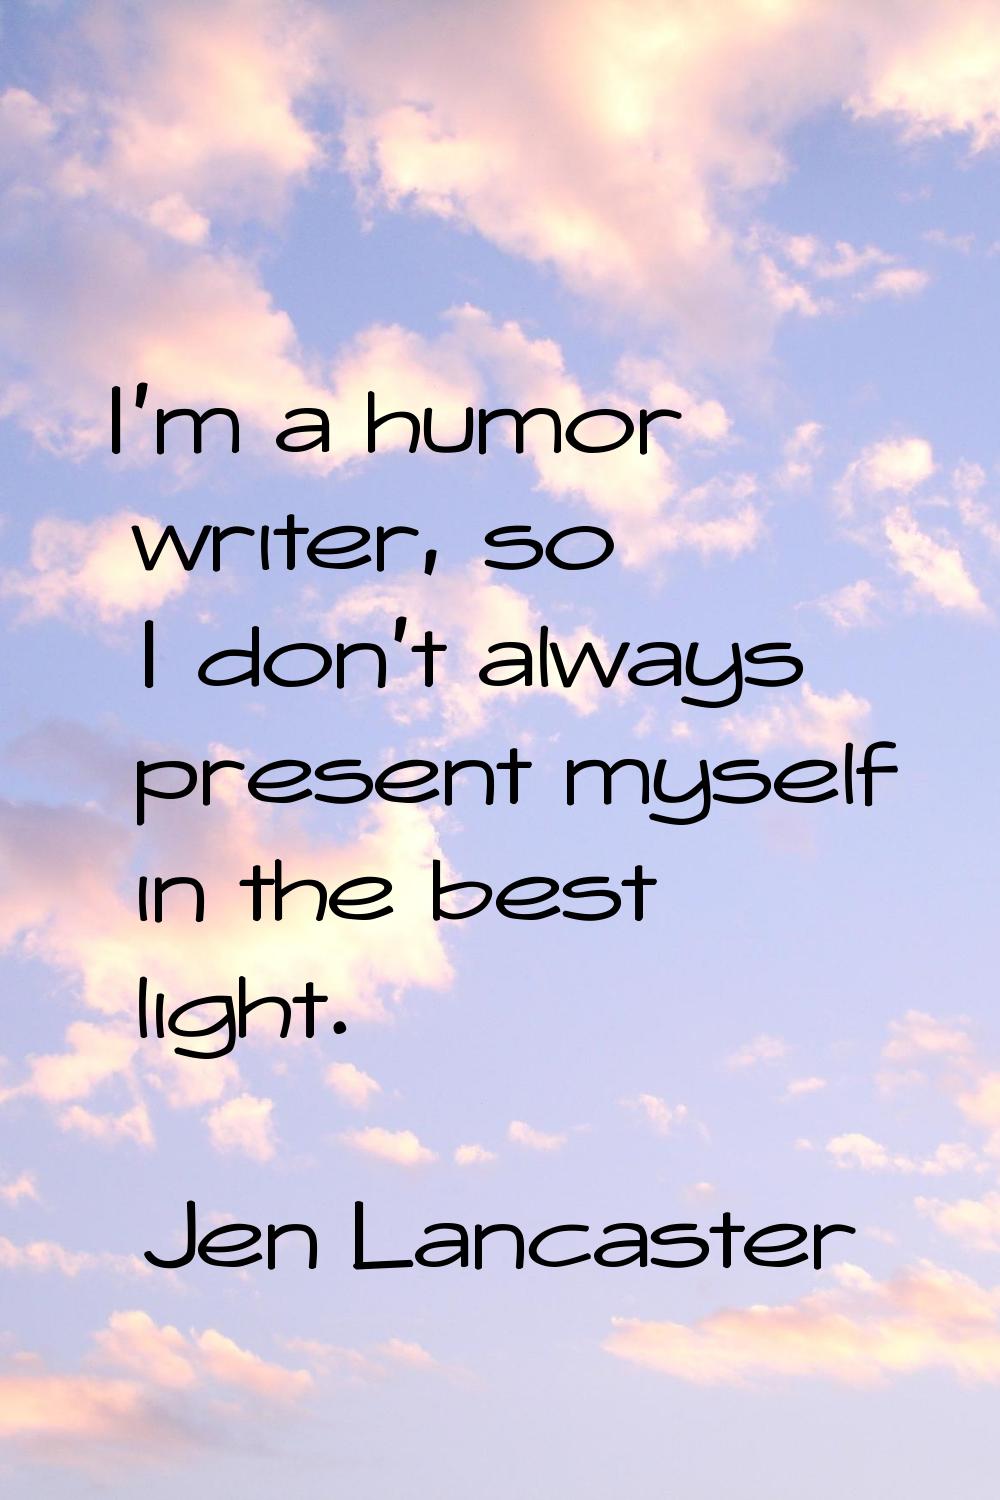 I'm a humor writer, so I don't always present myself in the best light.